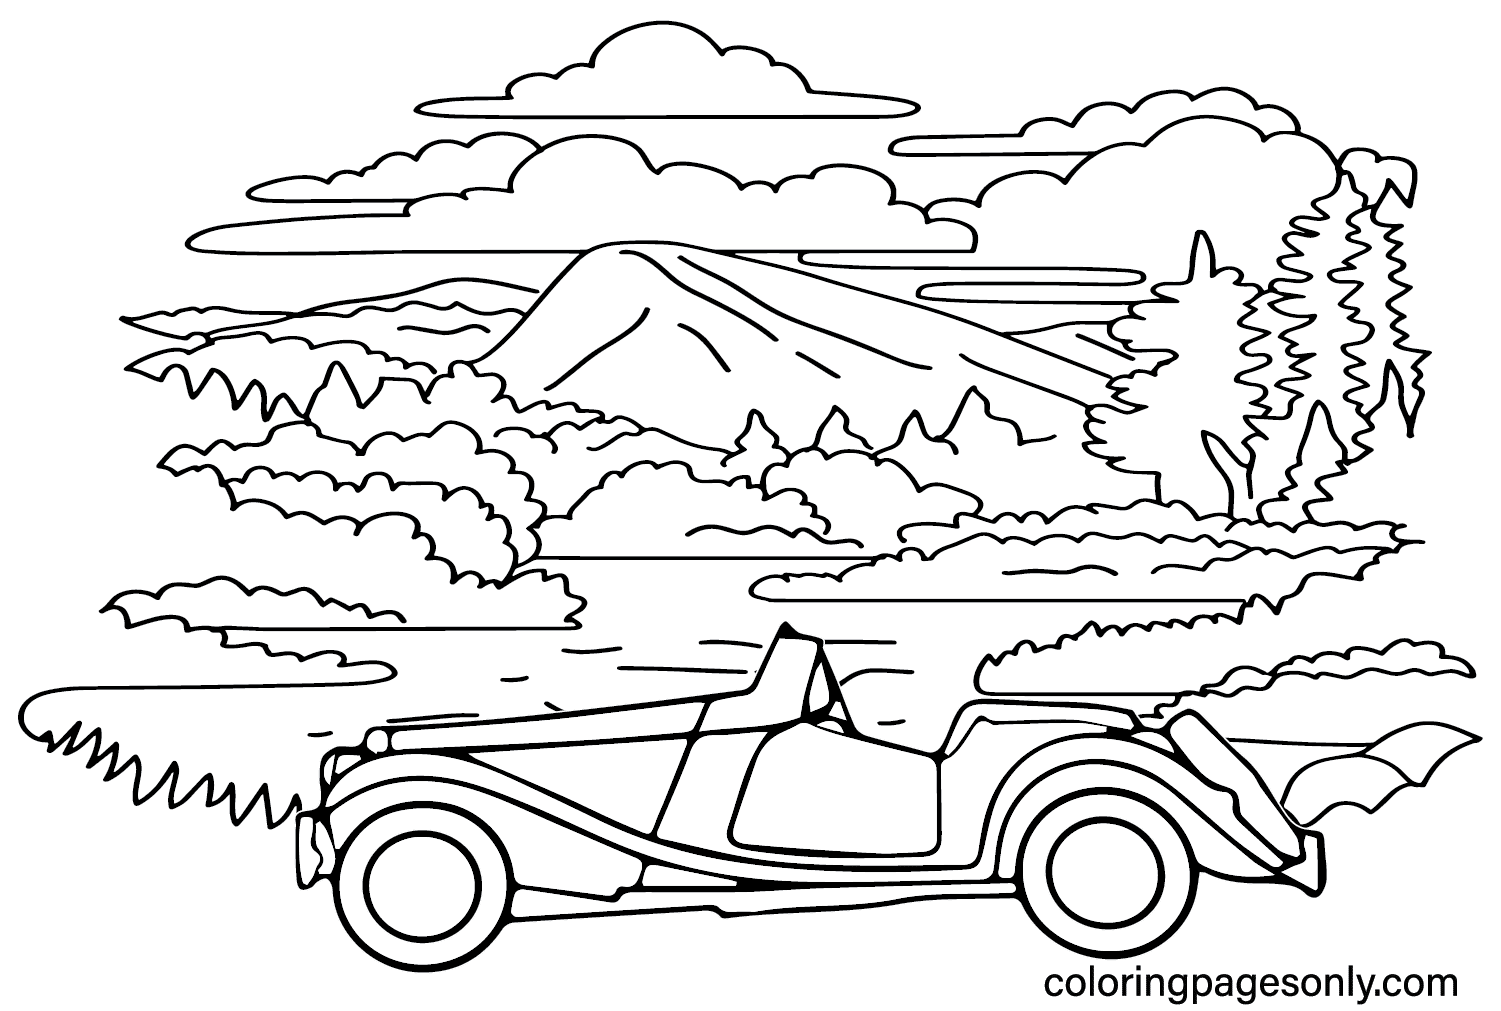 MG TF Coloring Page from MG